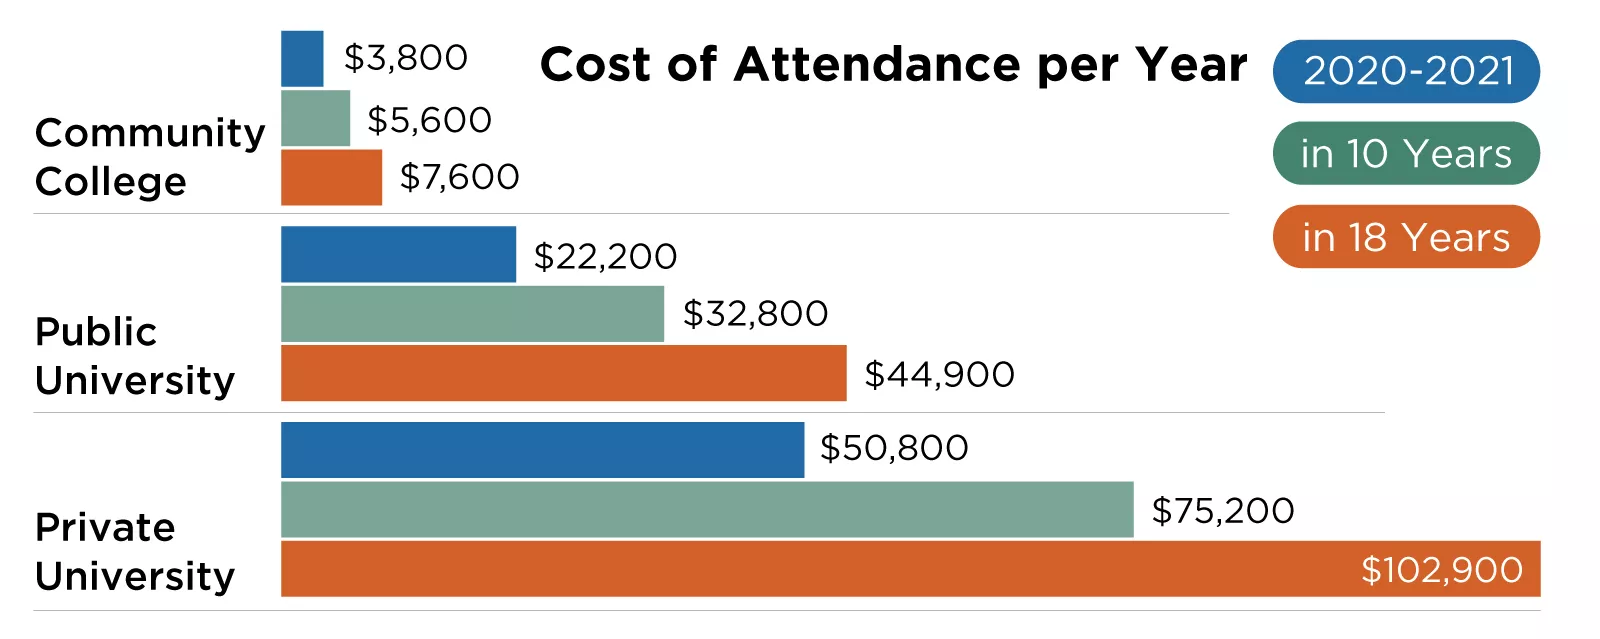  Cost of Attendance per Year
